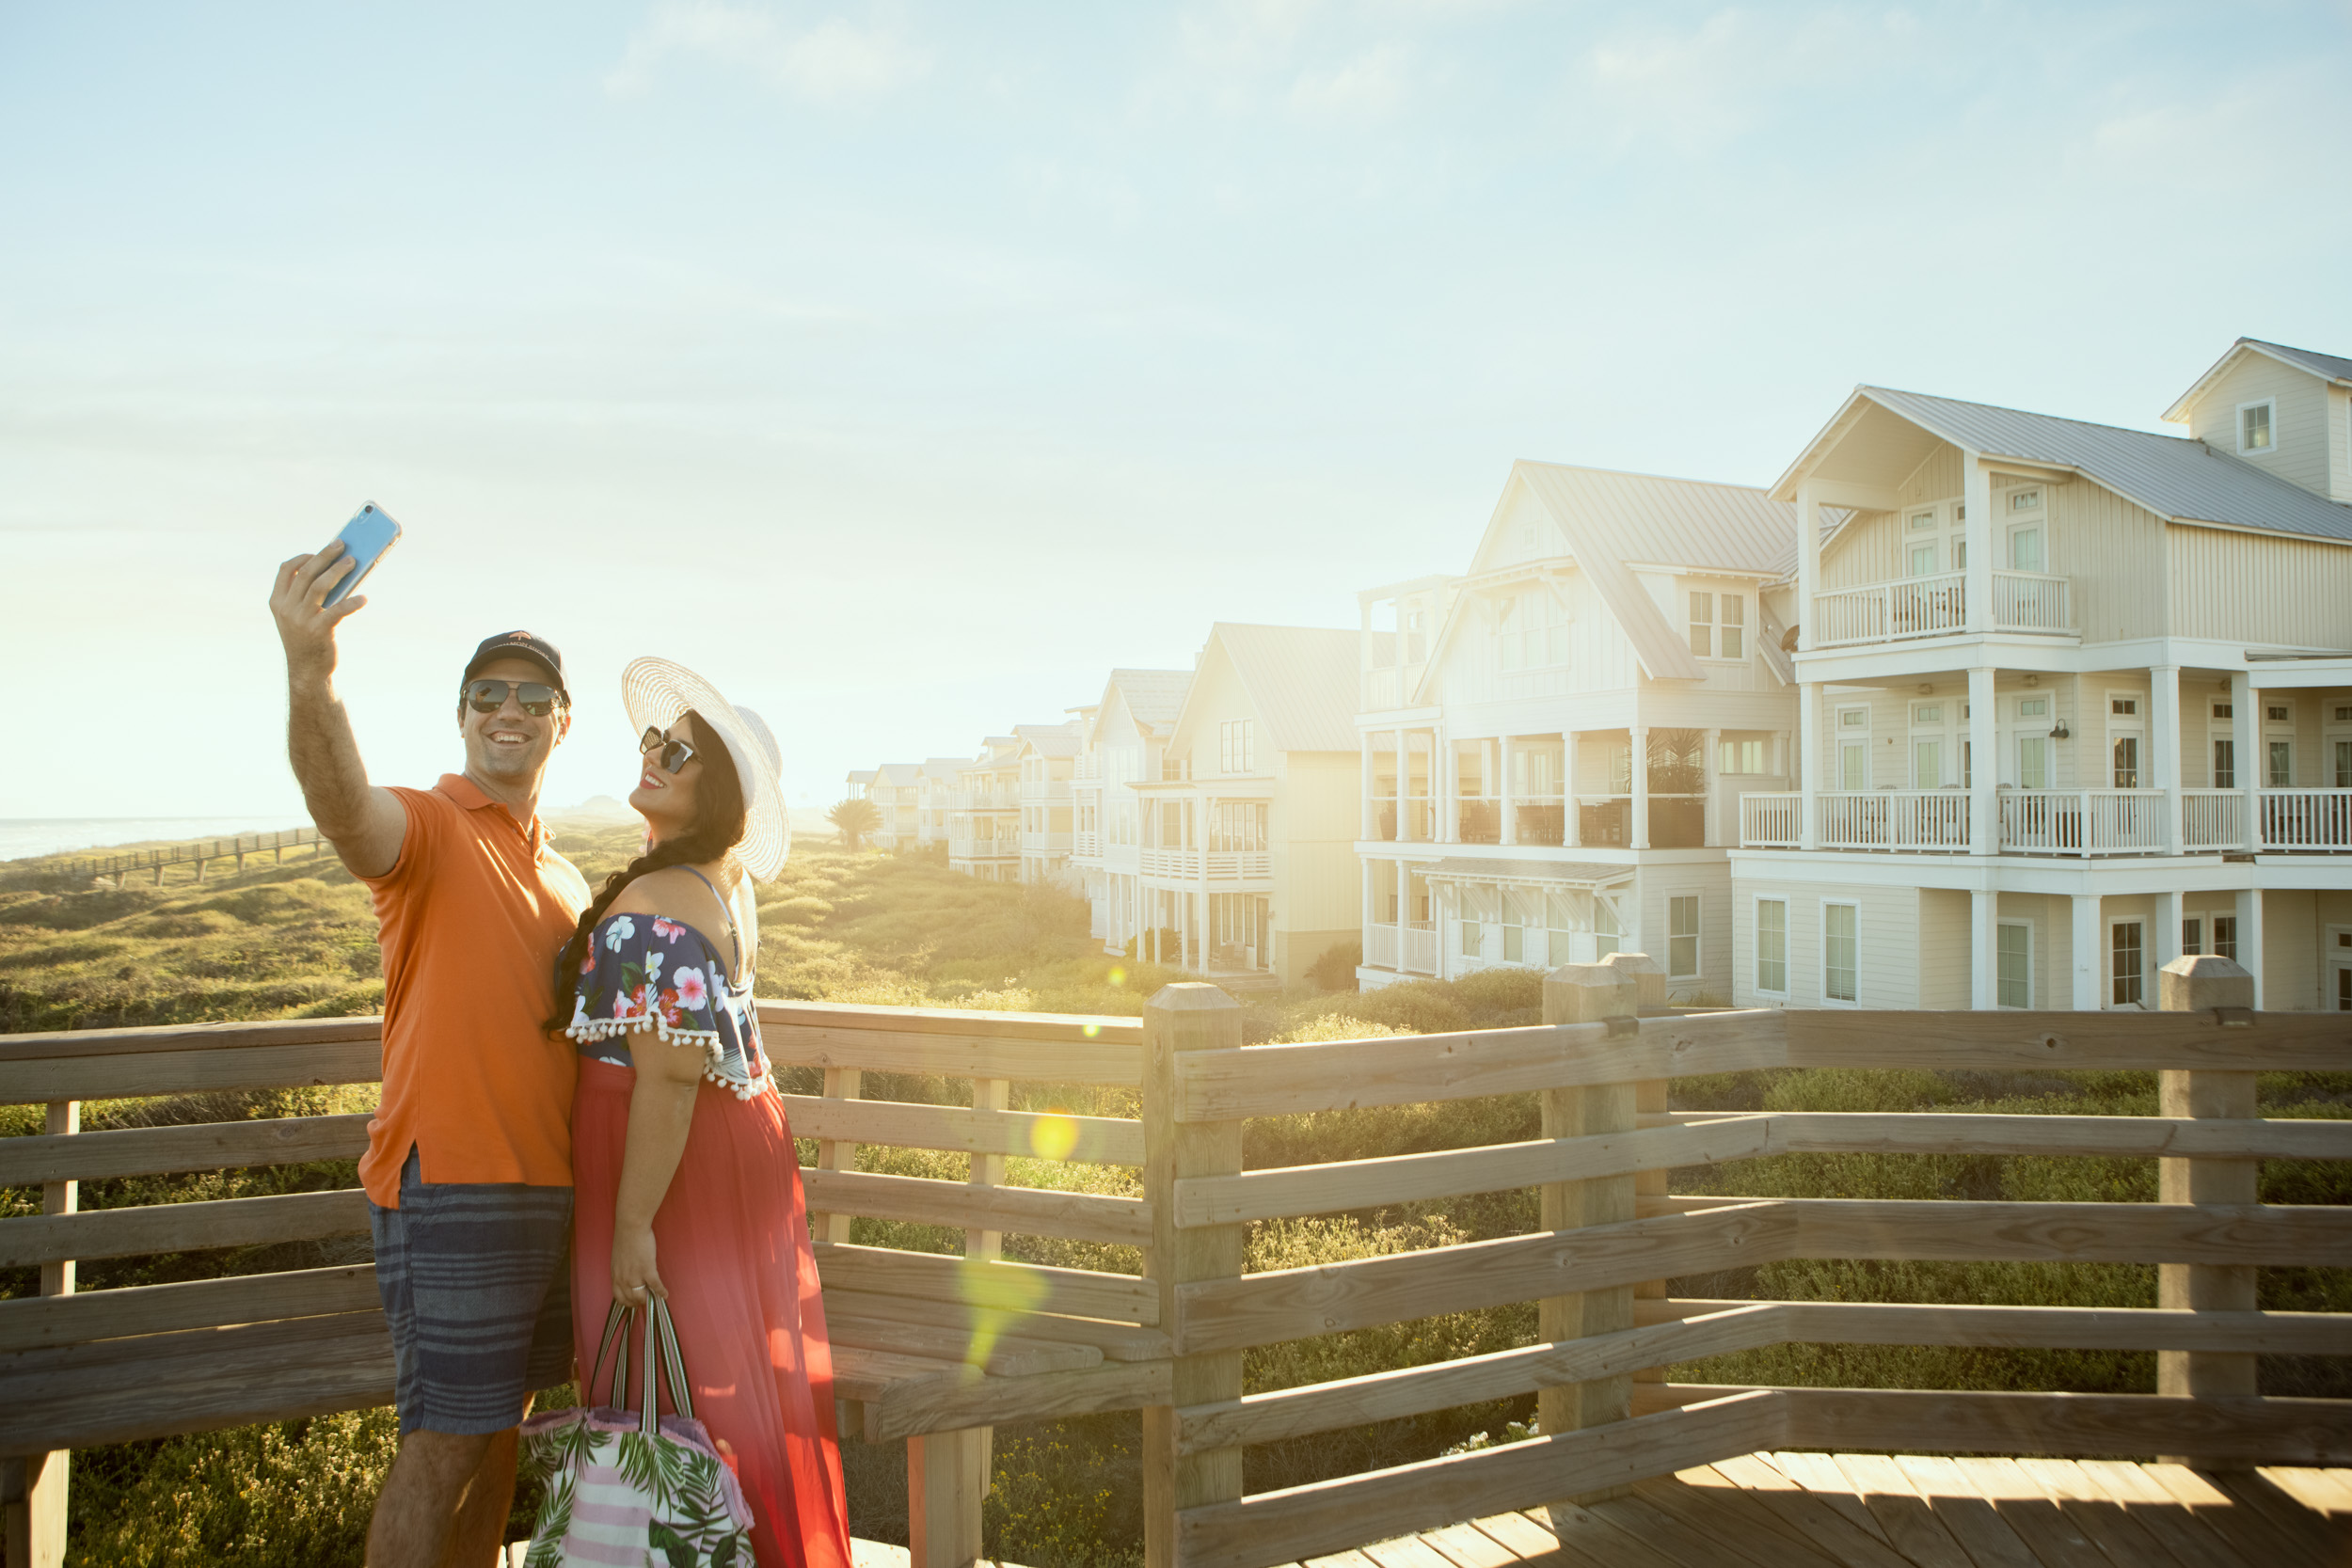 couple taking selfie photo on boardwalk with dunes and houses